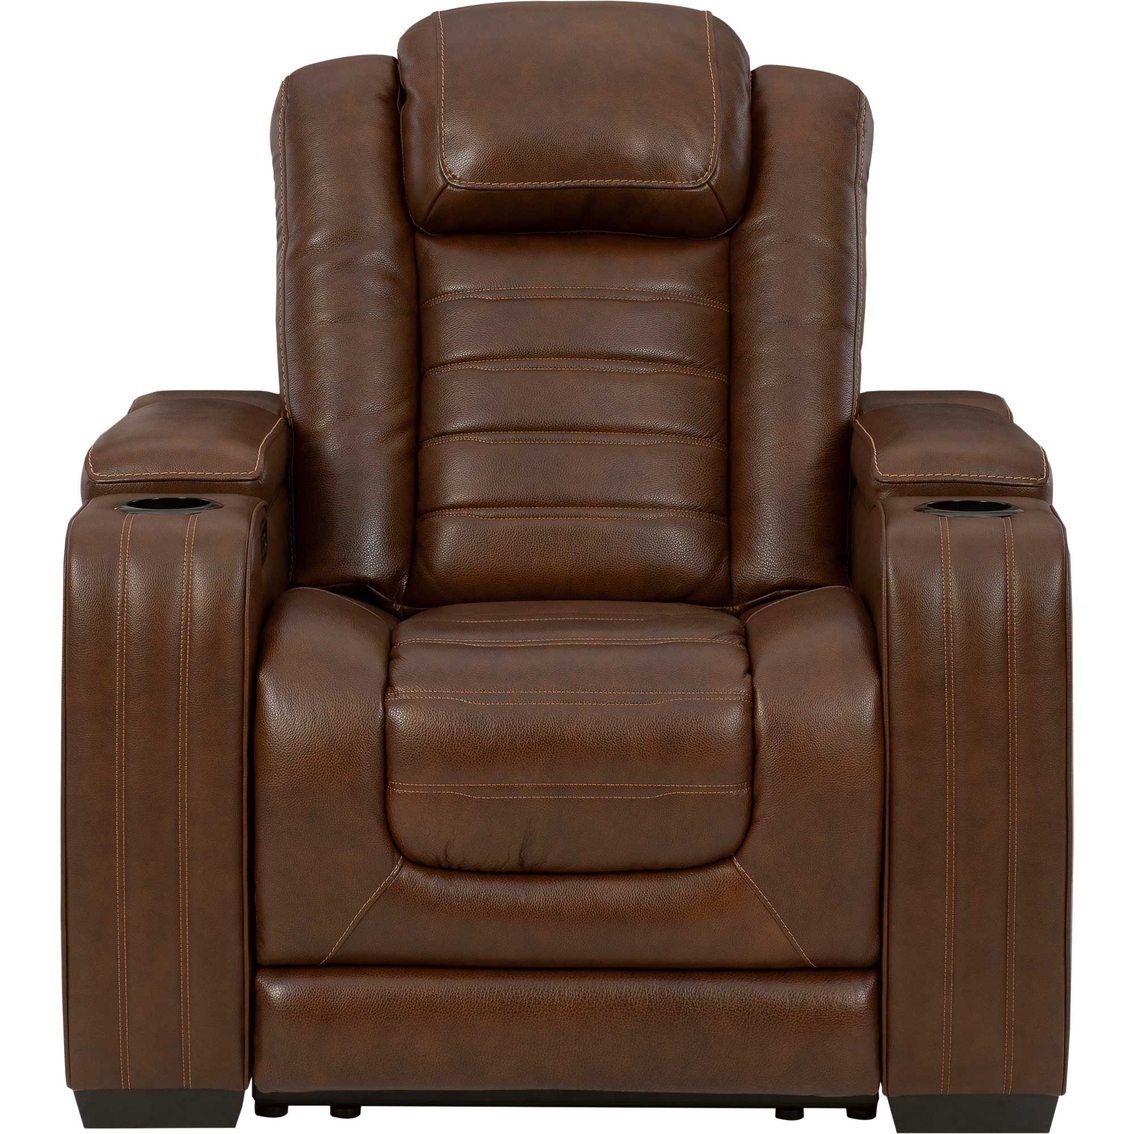 Signature Design by Ashley Backtrack Power Recliner with Adjustable Headrest - Image 2 of 9